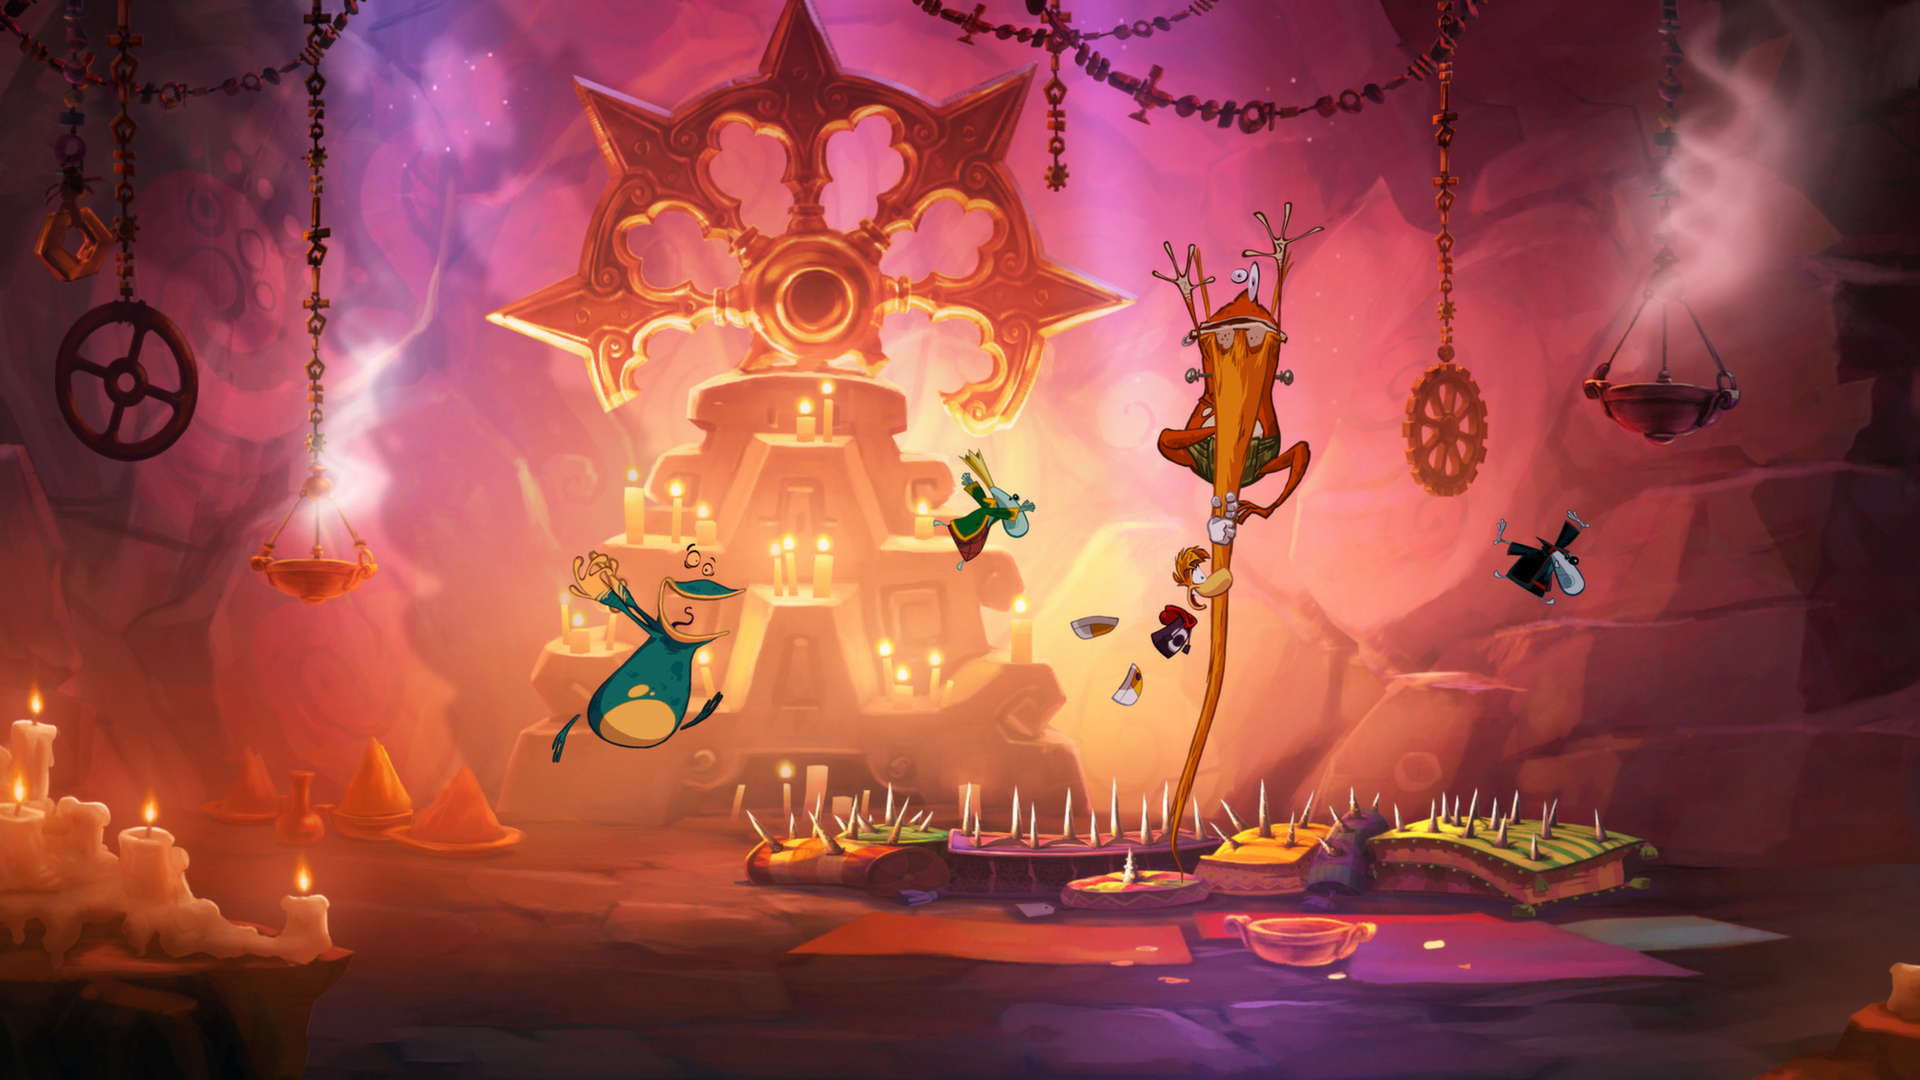 Free games: One of the best 2D platformers ever is free-to-keep from Ubisoft